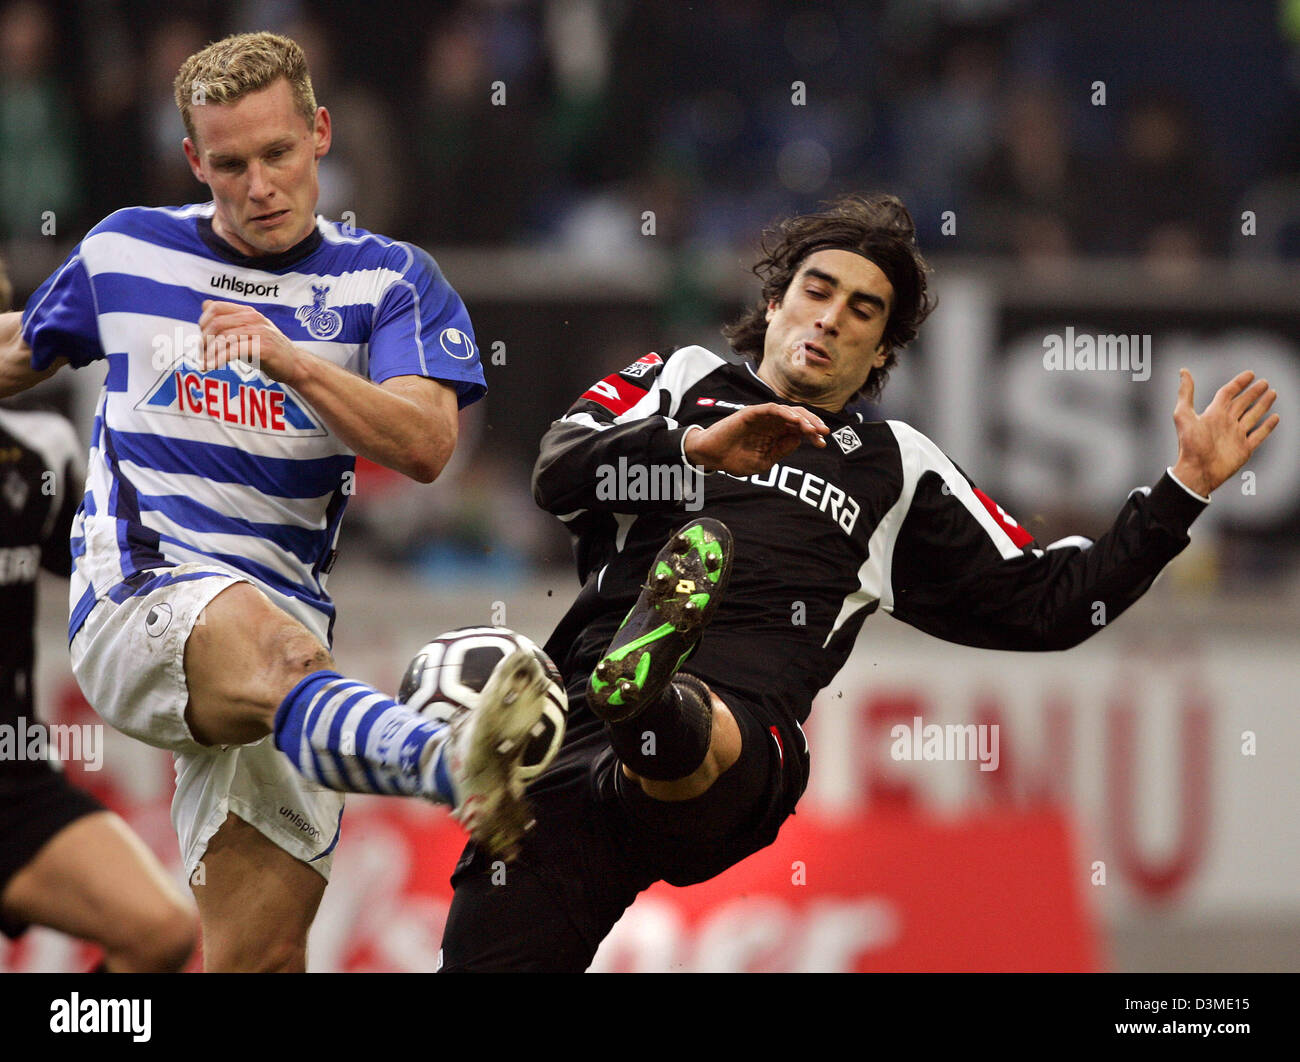 Duisburg's Markus Kurth (L) and Moenchengladbach's Ze Antonio (R) are locked in a battle for the ball in the Bundesliga soccer match between MSV Duisburg and Borussia Moenchengladbach at the MSV-Arena in Duisburg, Germany, Saturday, 11 February 2006.  Photo: Roland Weihrauch Stock Photo